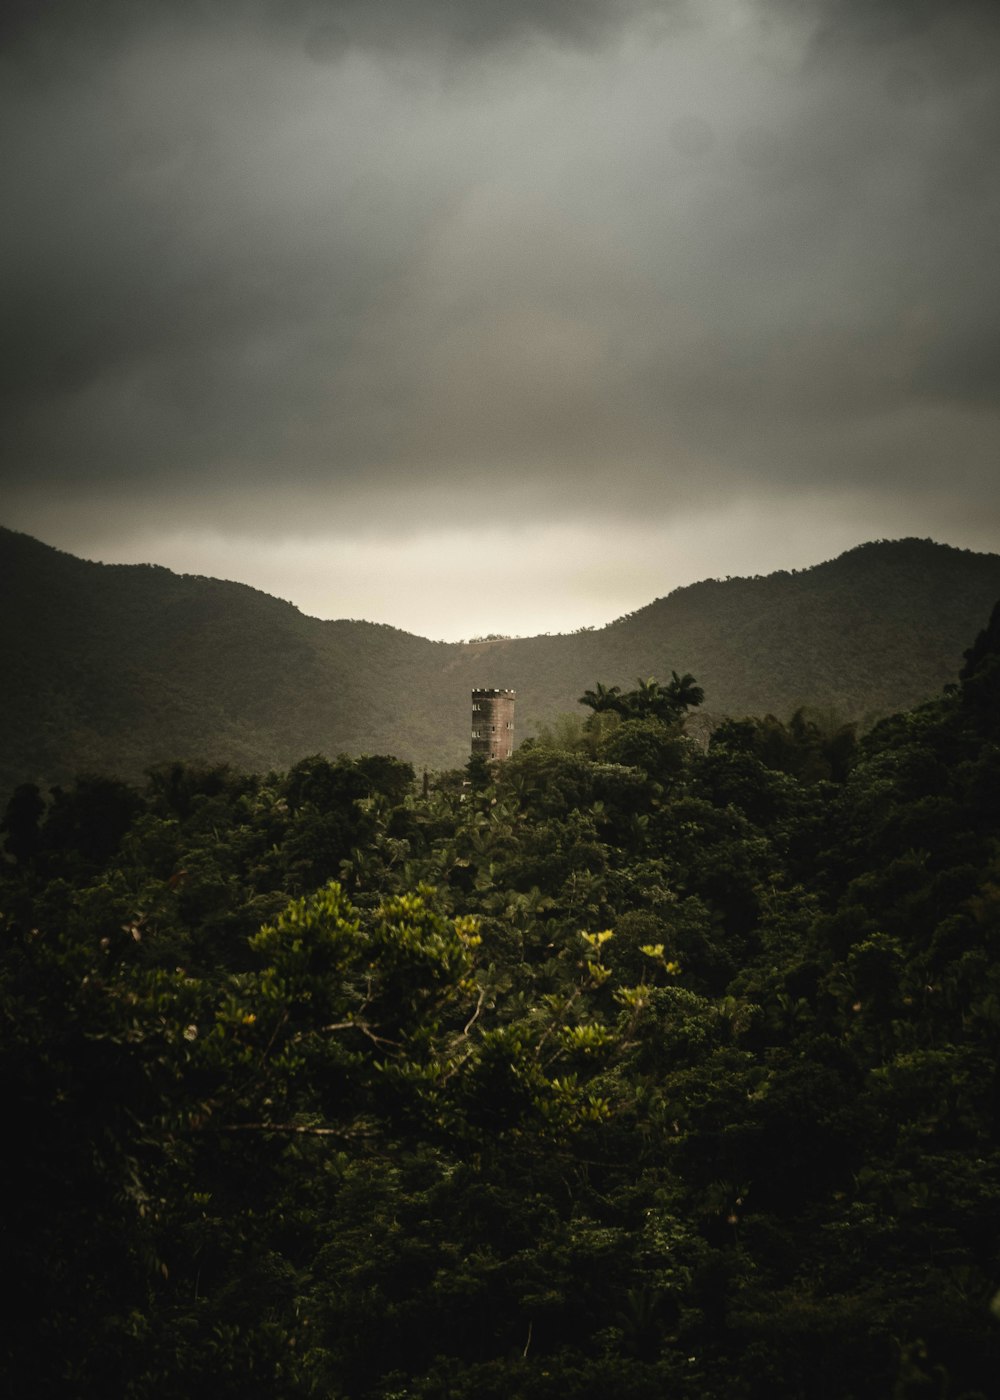 a tower in the middle of a forest under a cloudy sky